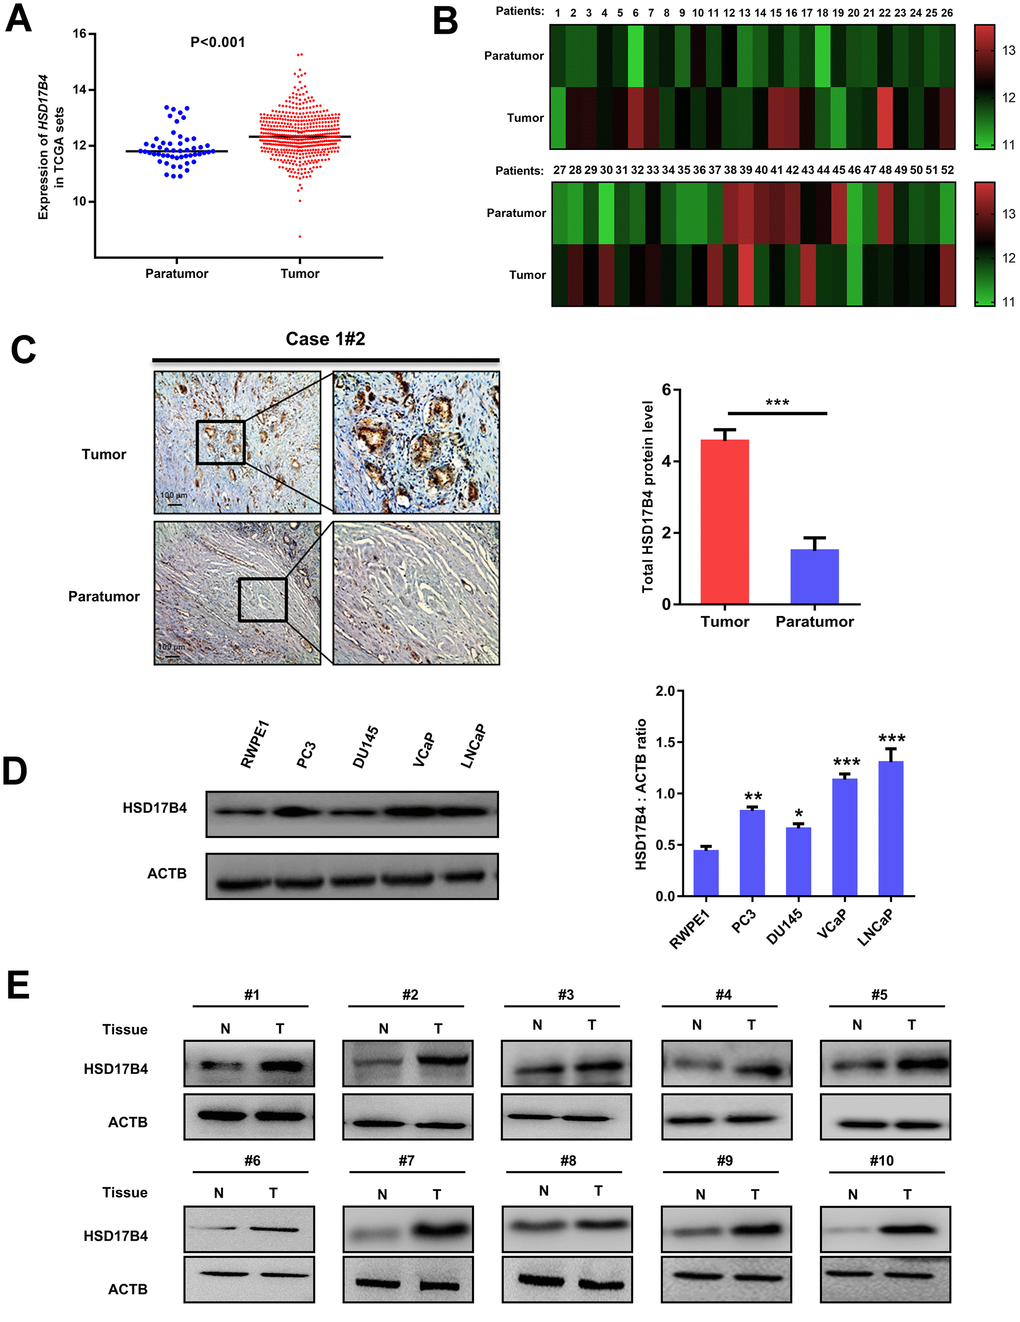 Expression of HSD17B4 is increased as PCa develops. (A) The expression of HSD17B4 was frequently upregulated in 498 PCa tissues (Tumor) compared with 52 adjacent normal prostate tissue samples (Paratumor) in the TCGA profile. (B) HSD17B4 expression was markedly increased in 52 paired PCa tissues (Tumor) and their adjacent normal tissues (Paratumor) in the TCGA profile. (C) Immunohistochemical staining of total HSD17B4 protein in tumor and adjacent tissues. A total of 10 PCa tissues and 10 adjacent normal prostate tissues were analyzed. Quantitative analysis of total HSD17B4 expression was performed by ImageJ. (D) Characterization of total HSD17B4 protein levels in PCa cell lines. Equal amounts of protein (20 μg) were immunoblotted for HSD17B4 and ACTB (loading control), as shown in the left panel. The intensities of total HSD17B4 protein are quantified in the right panel. (E) HSD17B4 is overexpressed in PCa tissues compared to expression in adjacent tissues. Human PCa samples each paired with cancerous tissue (designated as T) and adjacent normal tissue (designated as N) were lysed and directly subjected to western blotting. Ten pairs of samples clearly exhibited HSD17B4 overexpression in PCa tissues. Data are shown as the mean ± SD (n = 3) or typical photographs of one representative experiment. Similar results were obtained in three independent experiments. *p 